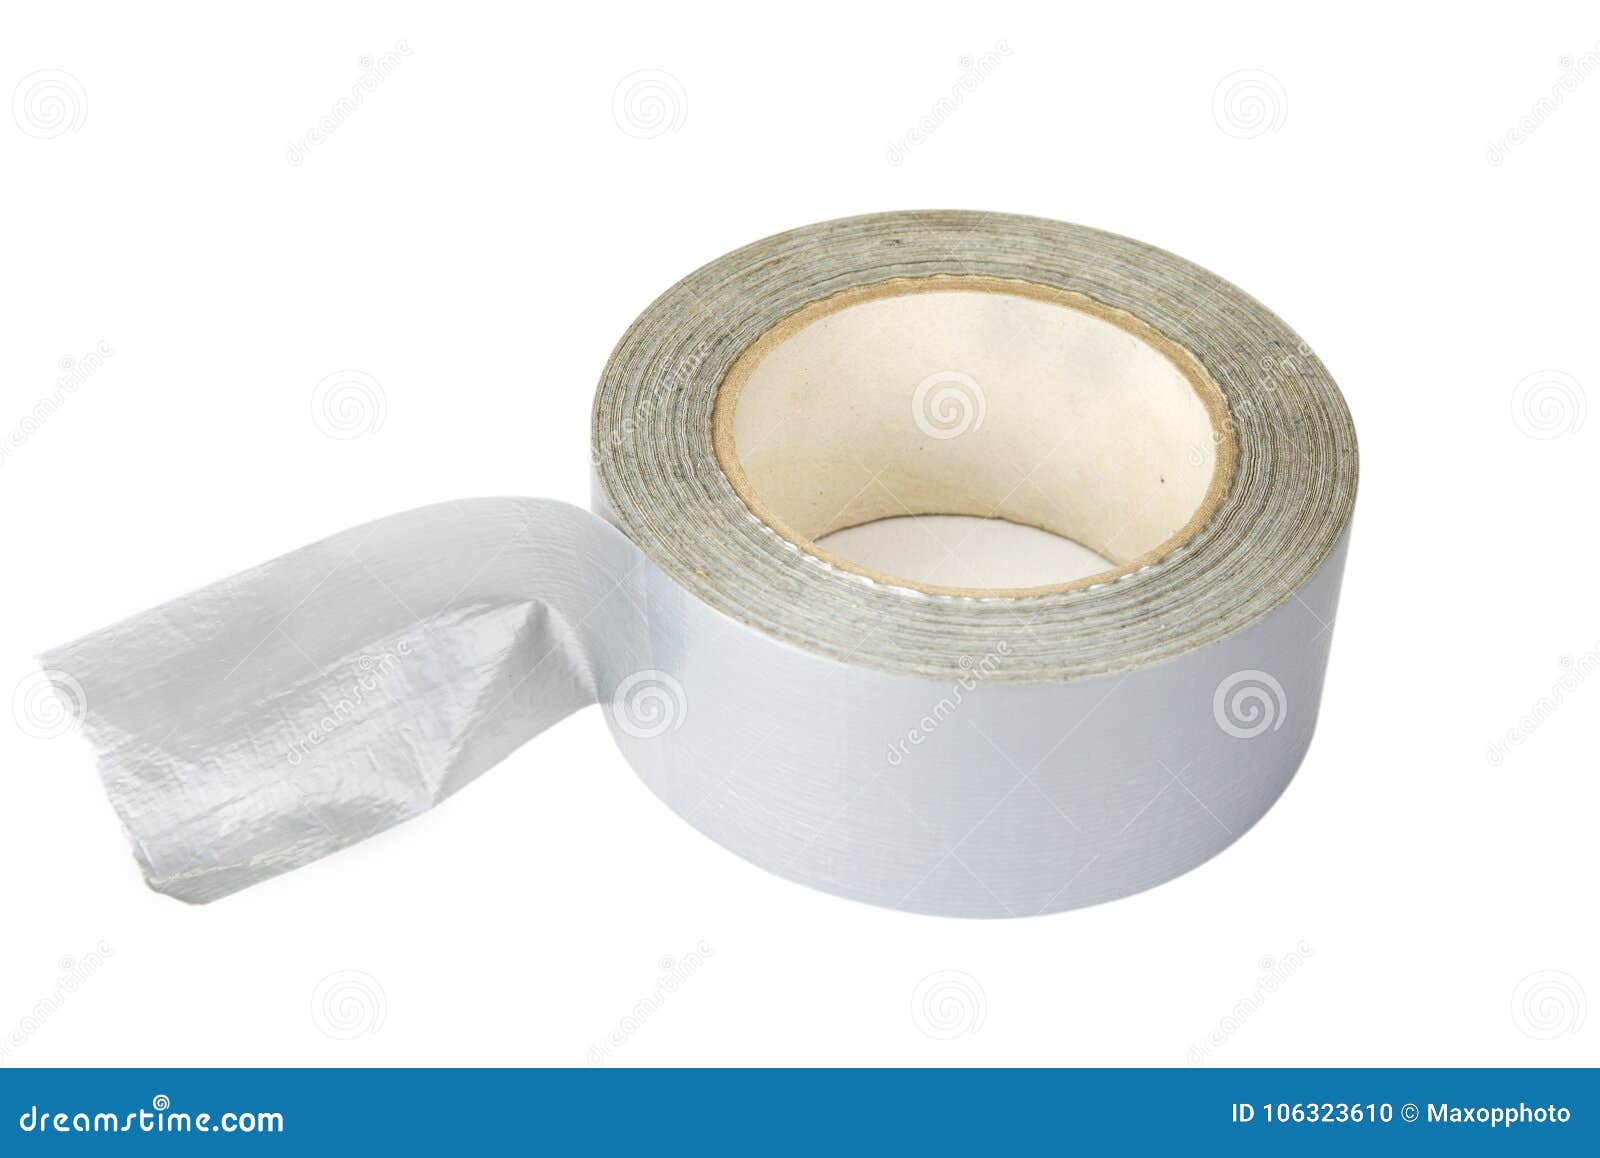 Roll of Duck or Duct Tape on the White Background. Stock Photo - Image of  duct, insulating: 106323610